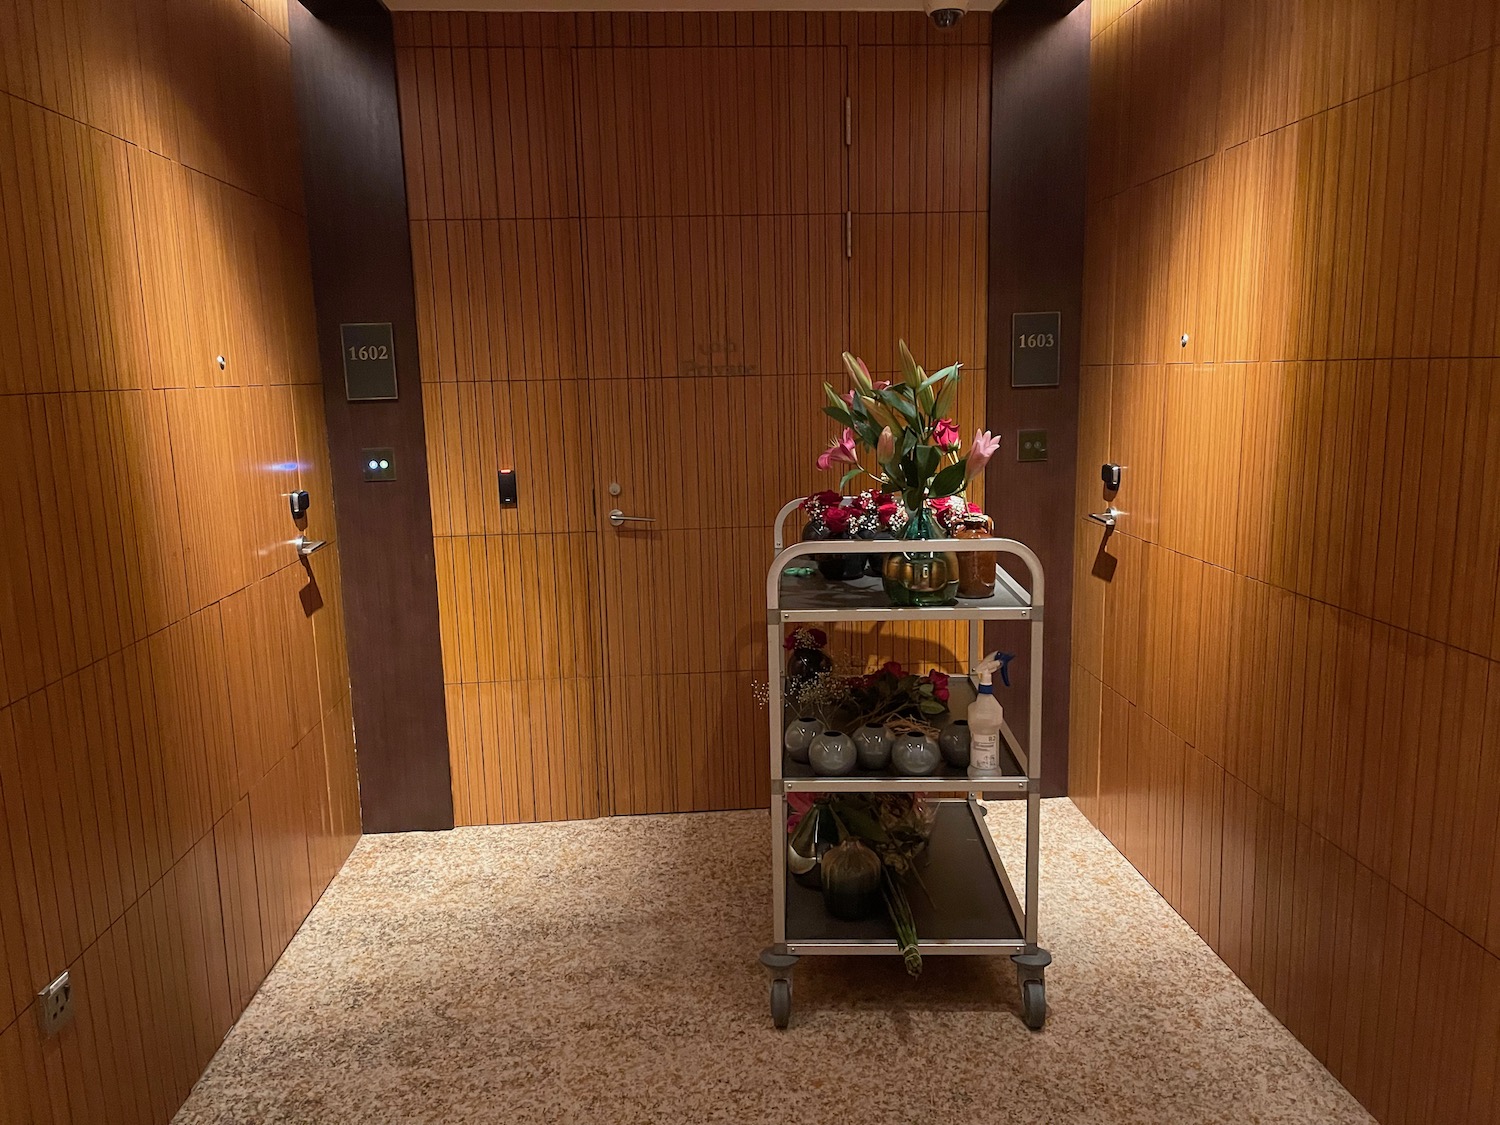 a cart with flowers and vases in a room with doors